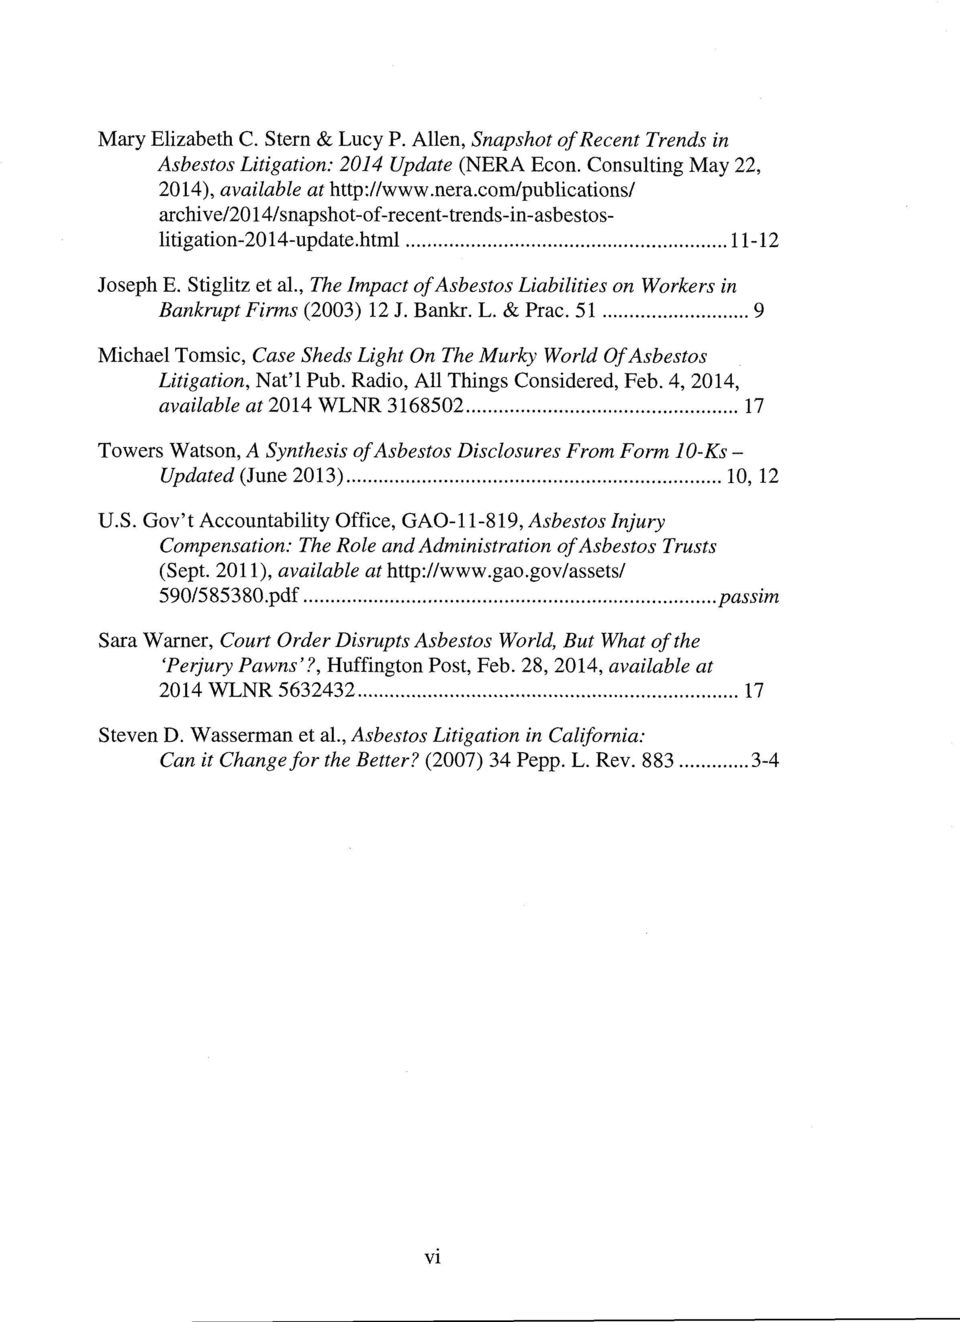 , The Impact of Asbestos Liabilities on Workers in Bankrupt Firms (2003) 12 J. Bankr. L. & Prac. 51 9 Michael Tomsic, Case Sheds Light On The Murky World Of Asbestos Litigation, Nat'l Pub.